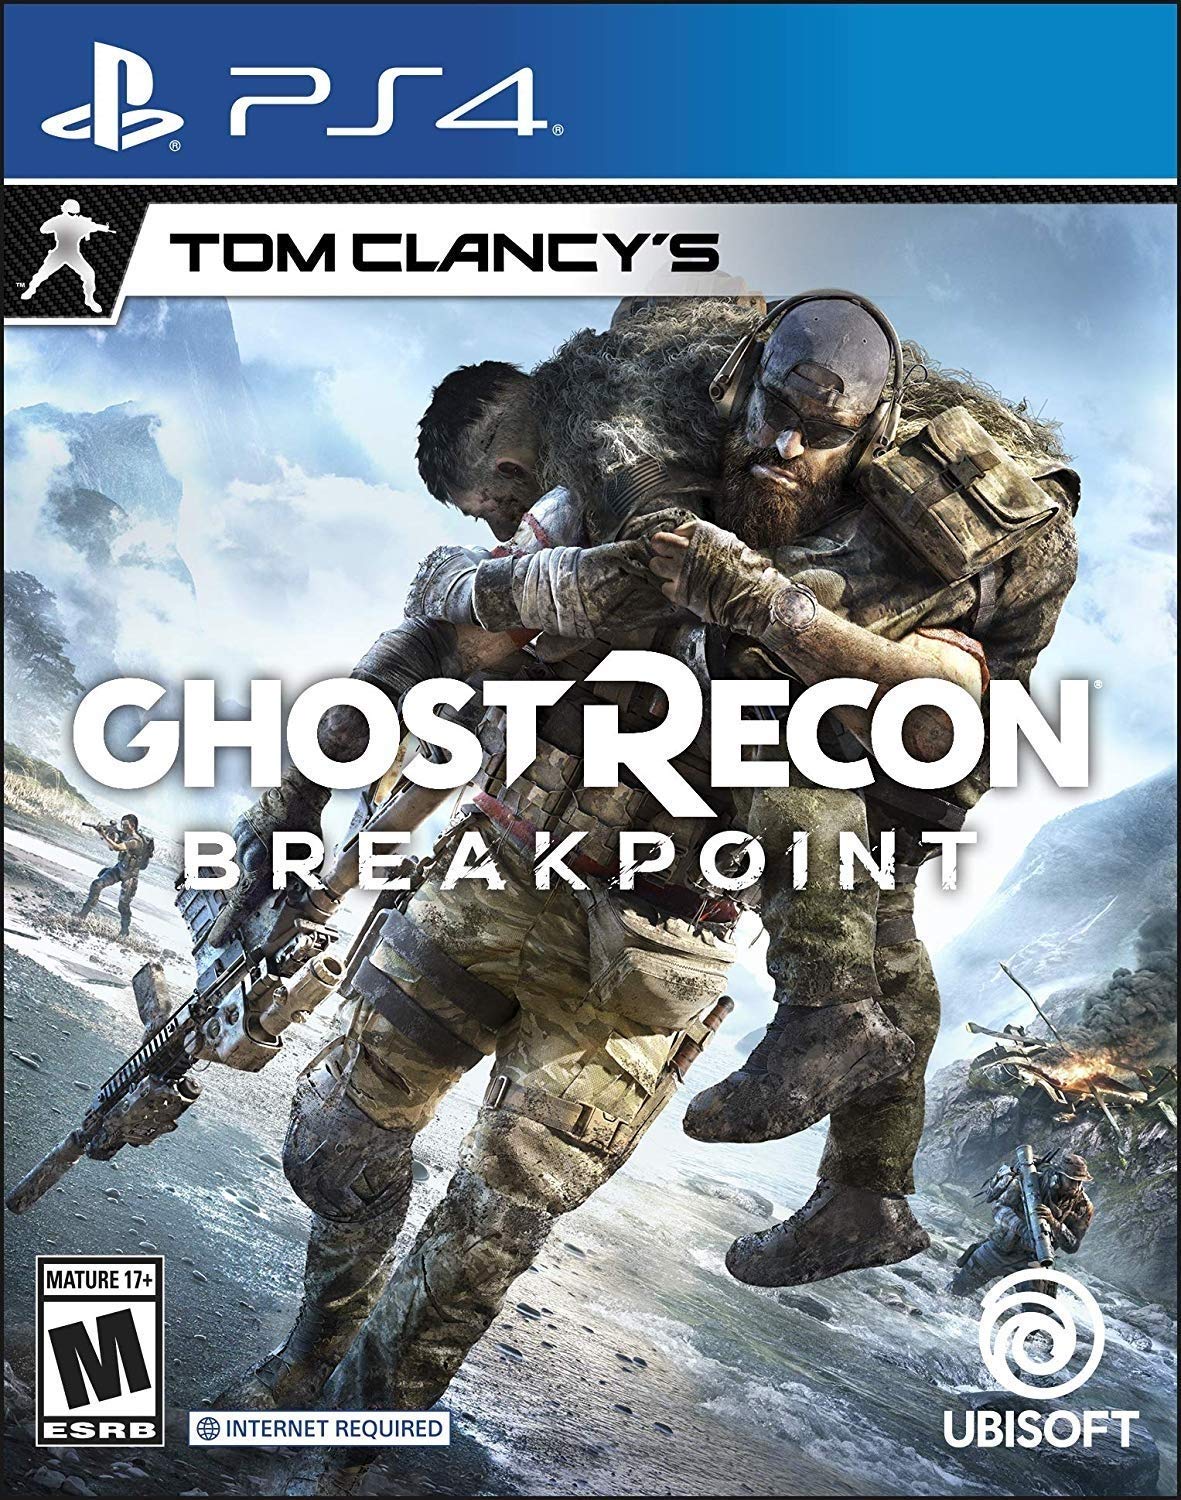 Ghost Recon Breakpoint PS4 boxart